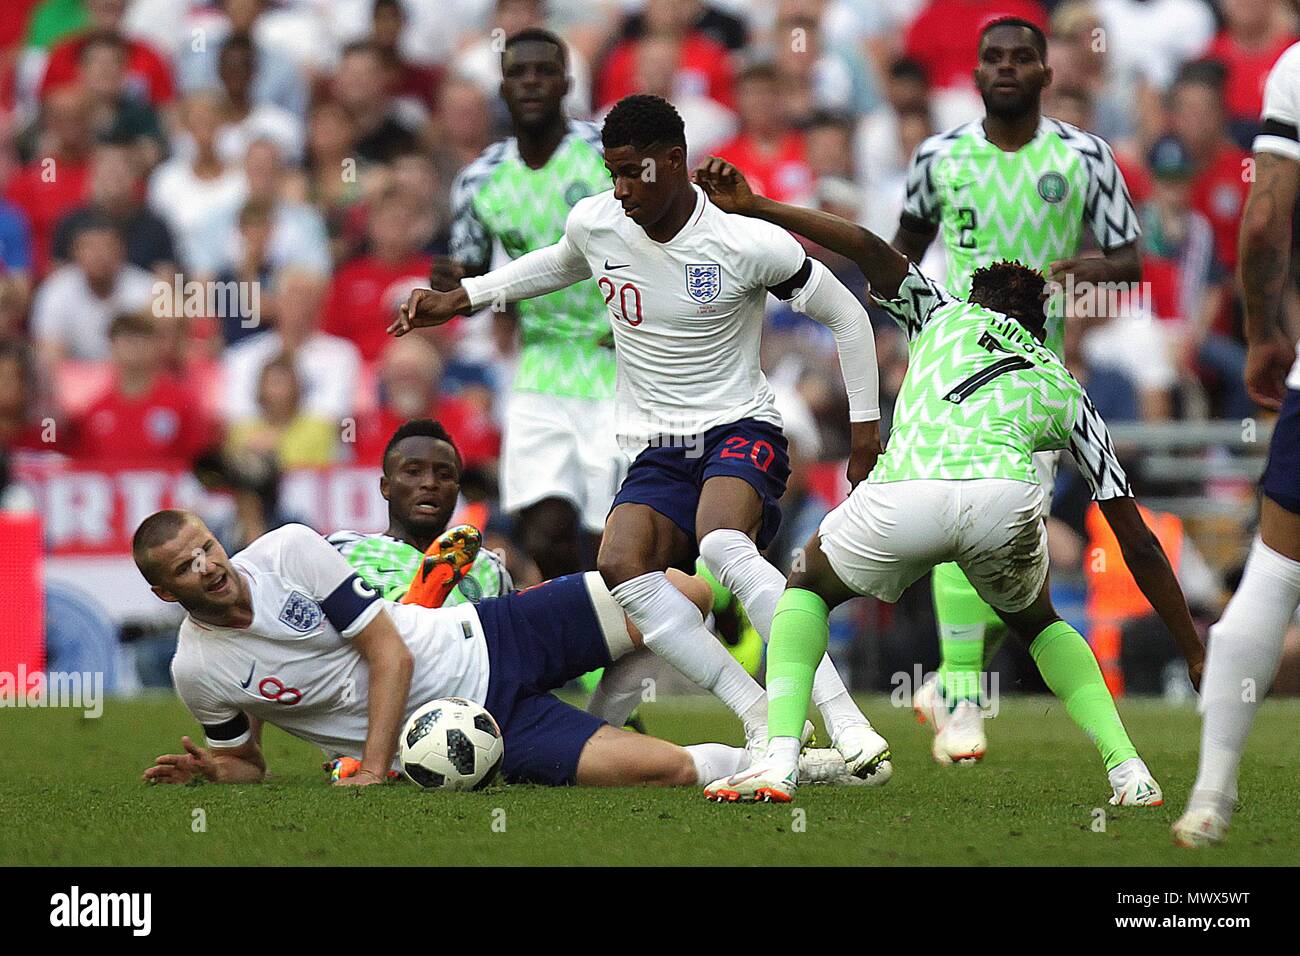 London, UK. 2nd June 2018. Marcus Rashford of Englandgoes past Ahmed Musa of Nigeria during the International Friendly match between England and Nigeria at Wembley Stadium on June 2nd 2018 in London, England. (Photo by Matt Bradshaw/phcimages.com) Credit: PHC Images/Alamy Live News Stock Photo